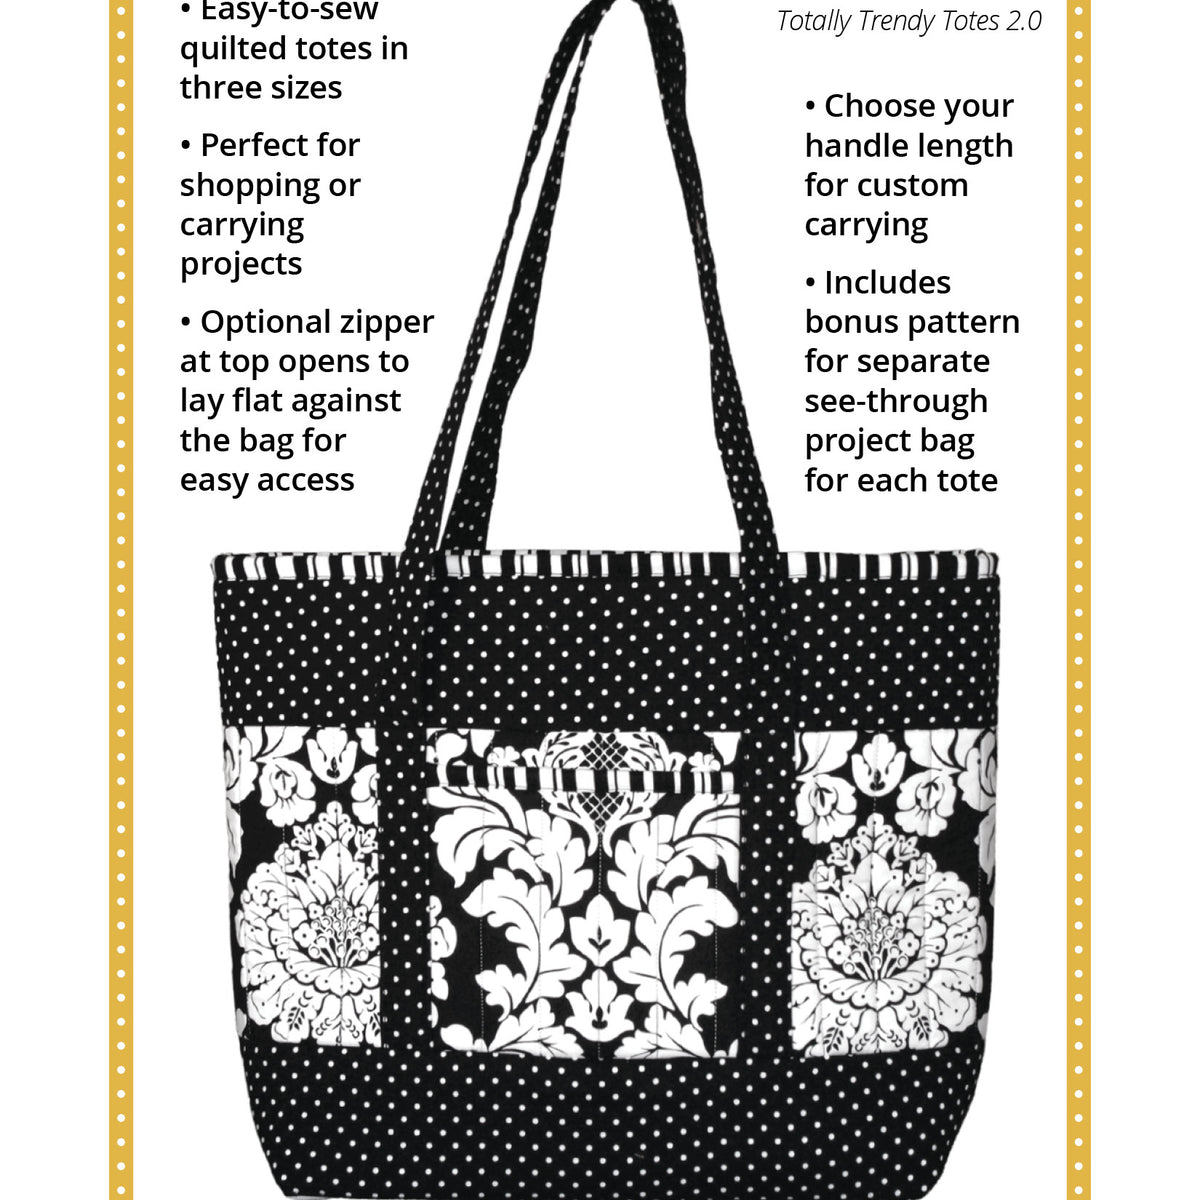 Totally Trendy Totes 2.0 by Annie